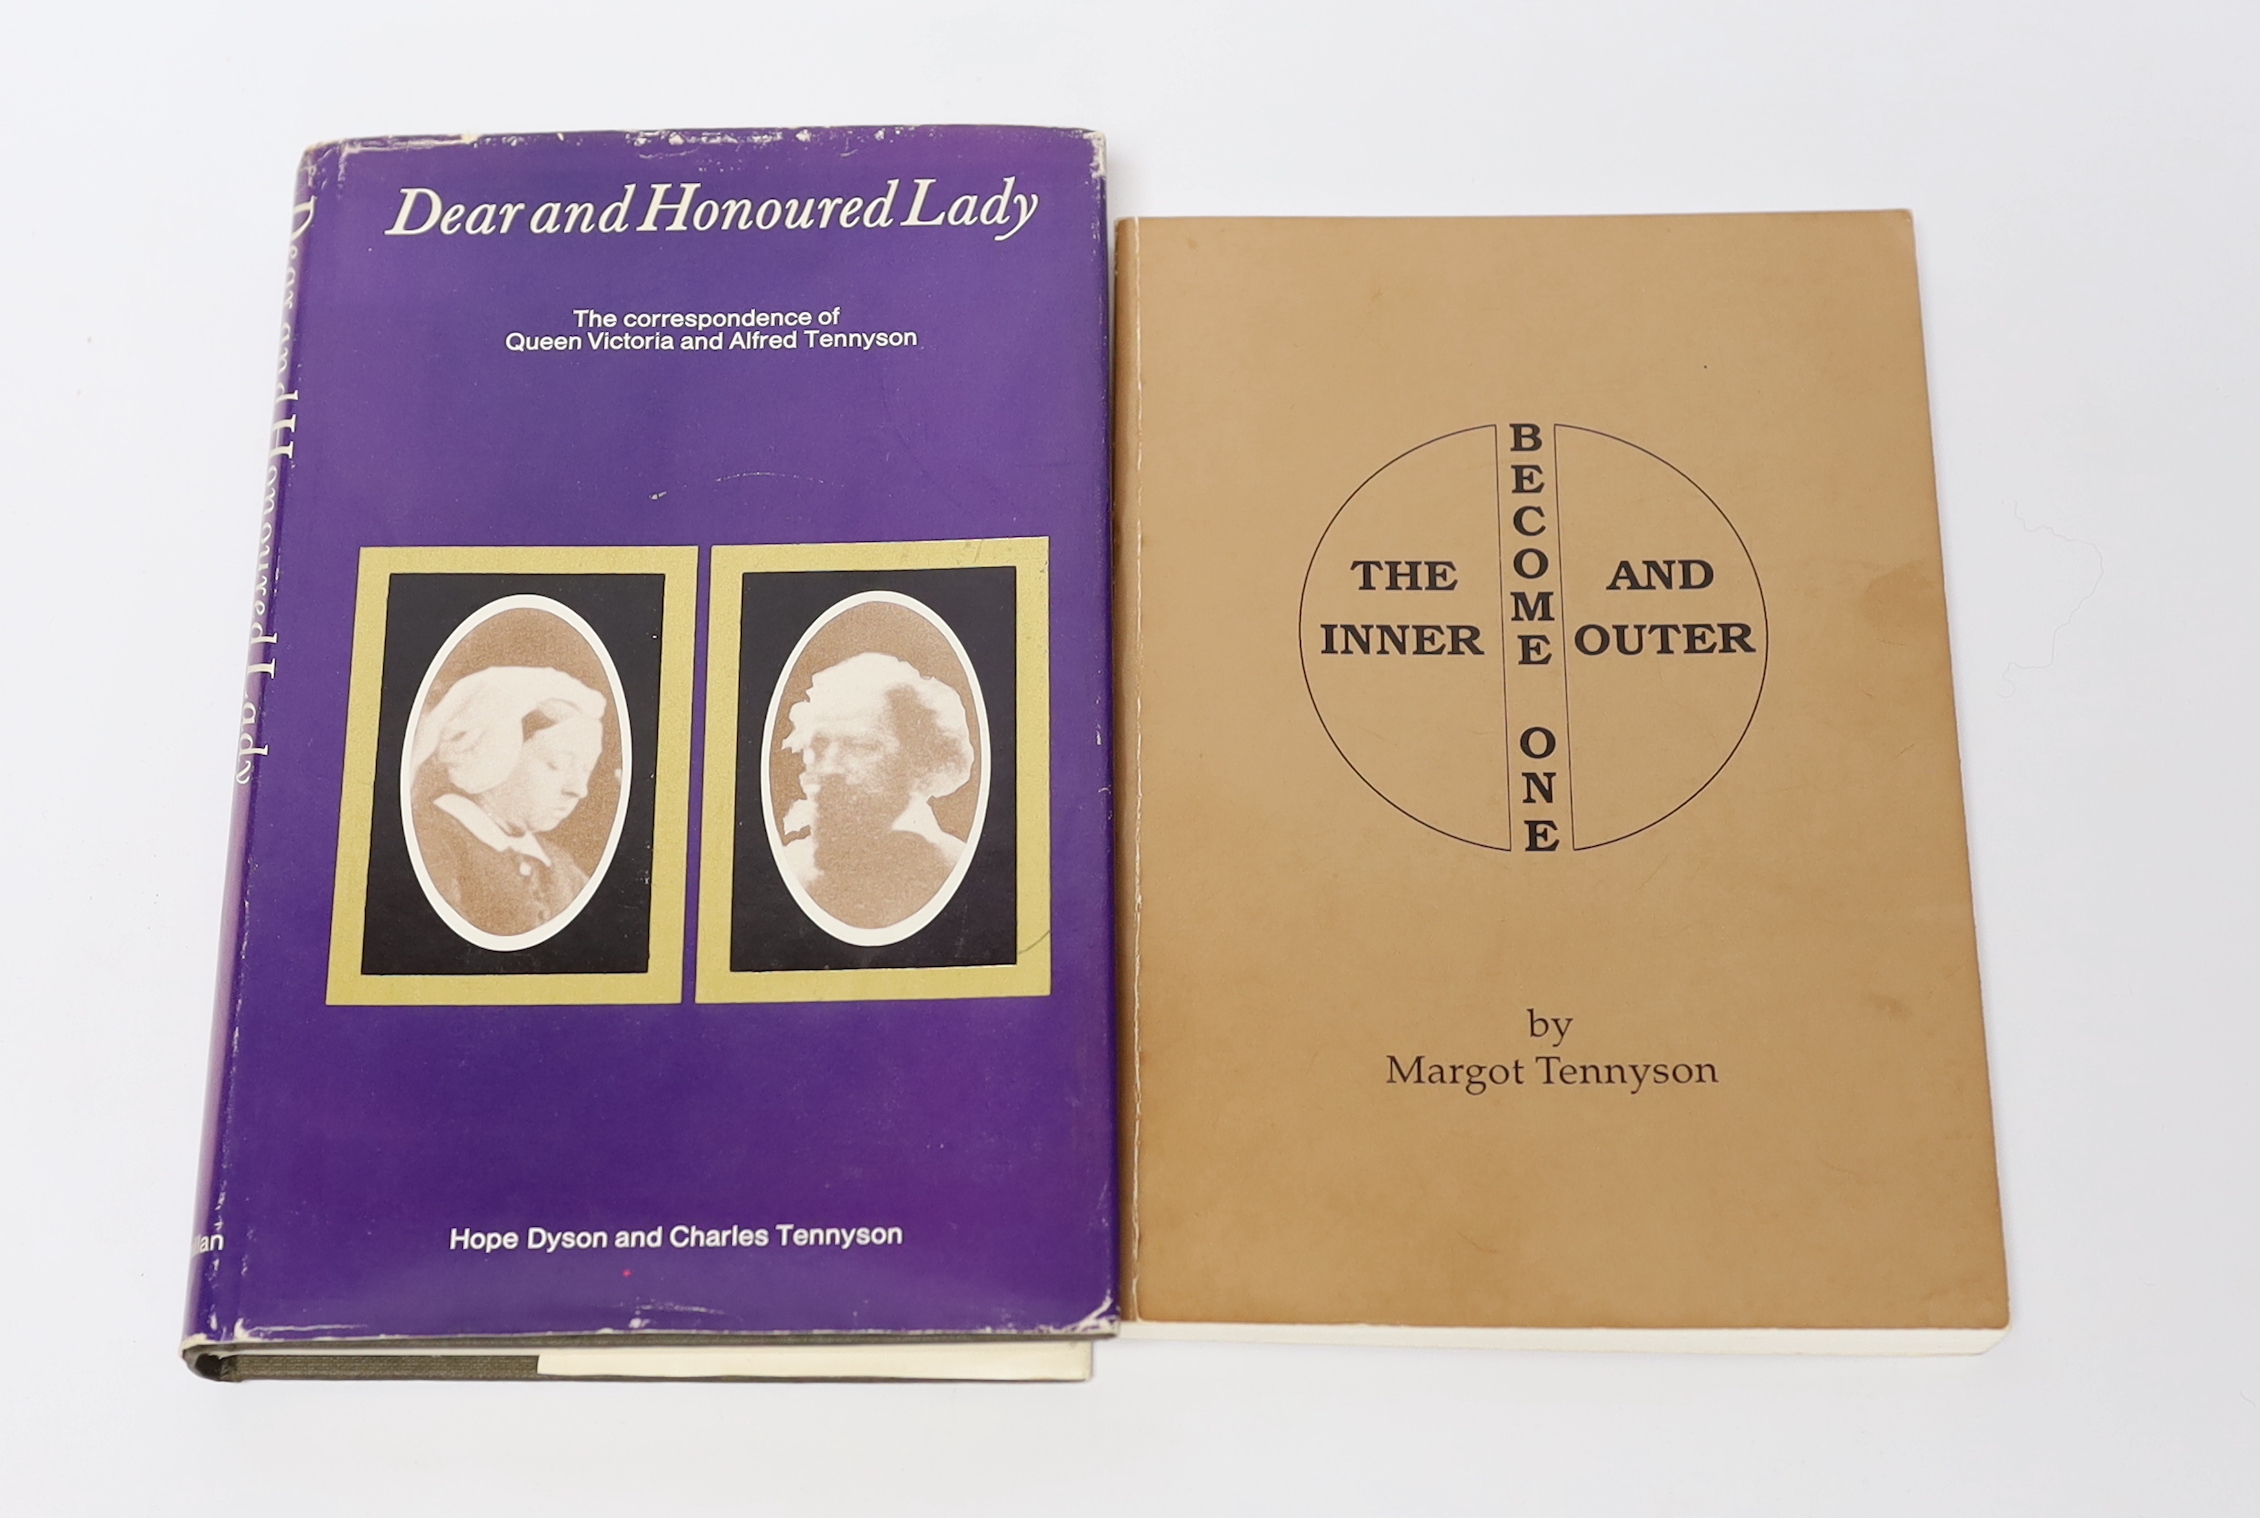 Tennyson, Hallam - The Haunted Mind: an autobiography. publisher's cloth and d/wrapper. 1984; Tennyson, Margot - The Inner and Outer One. photo. illus., paperback. (printed for the Author), 1992; together with 2 Charles